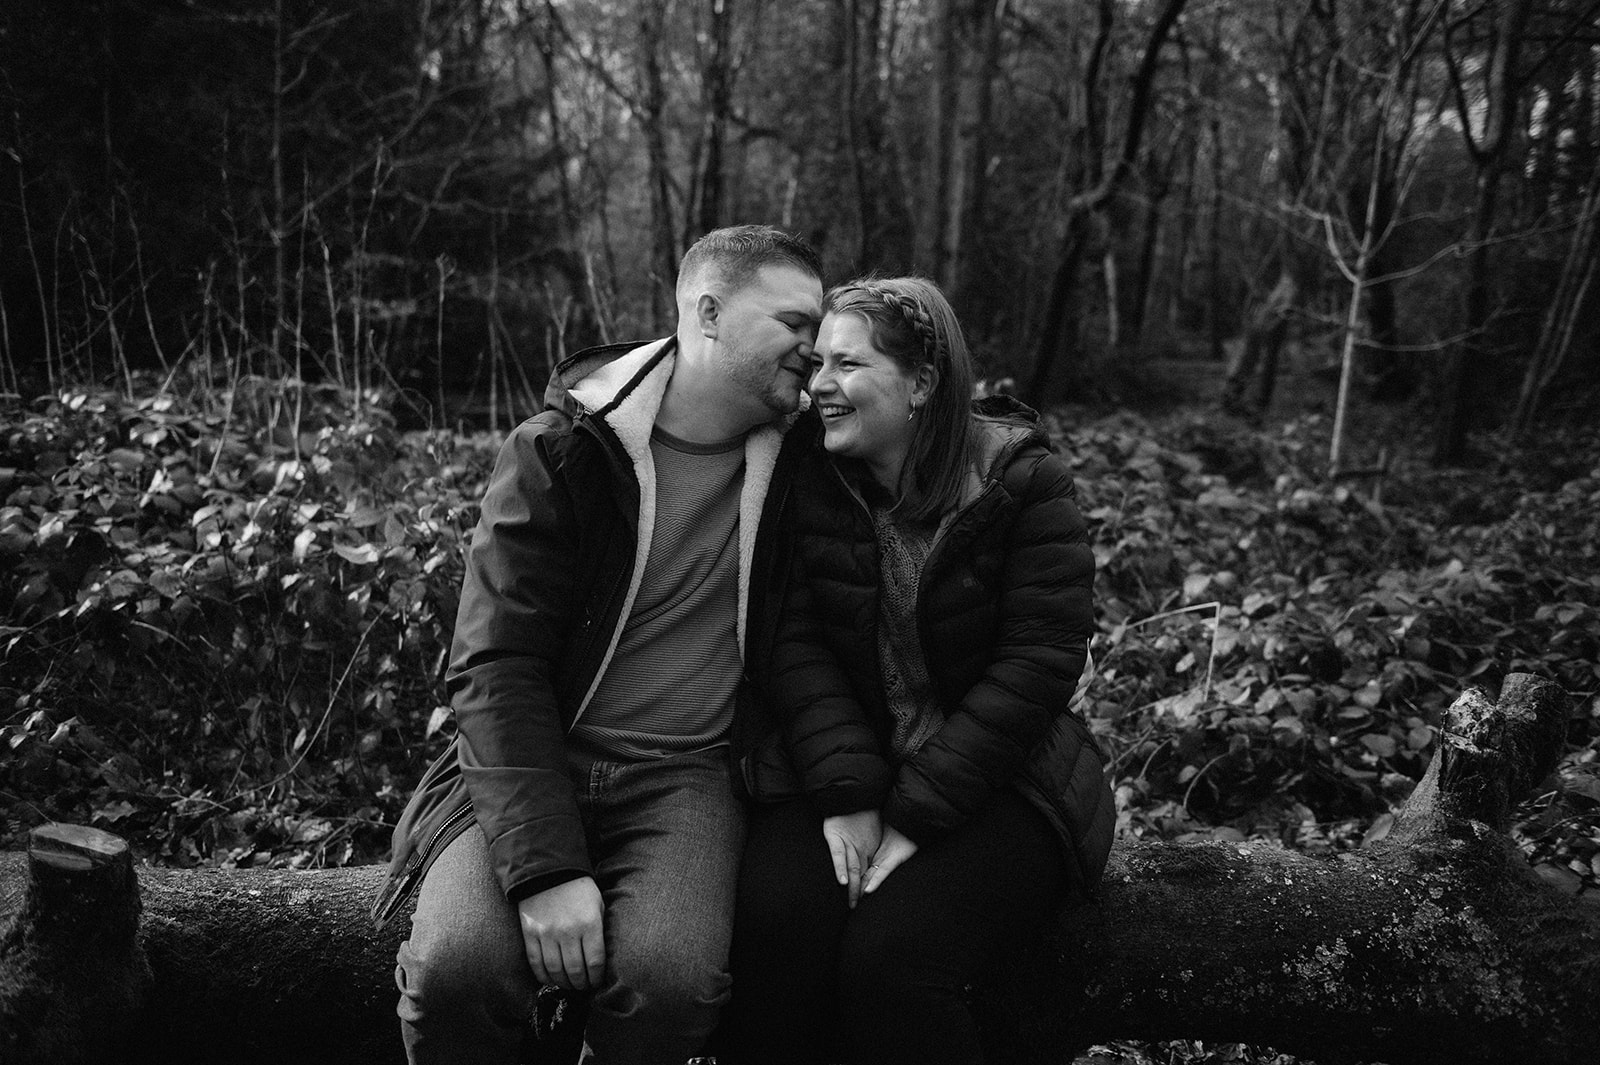 relaxed family photos in the Lickey Hills near Birmingham